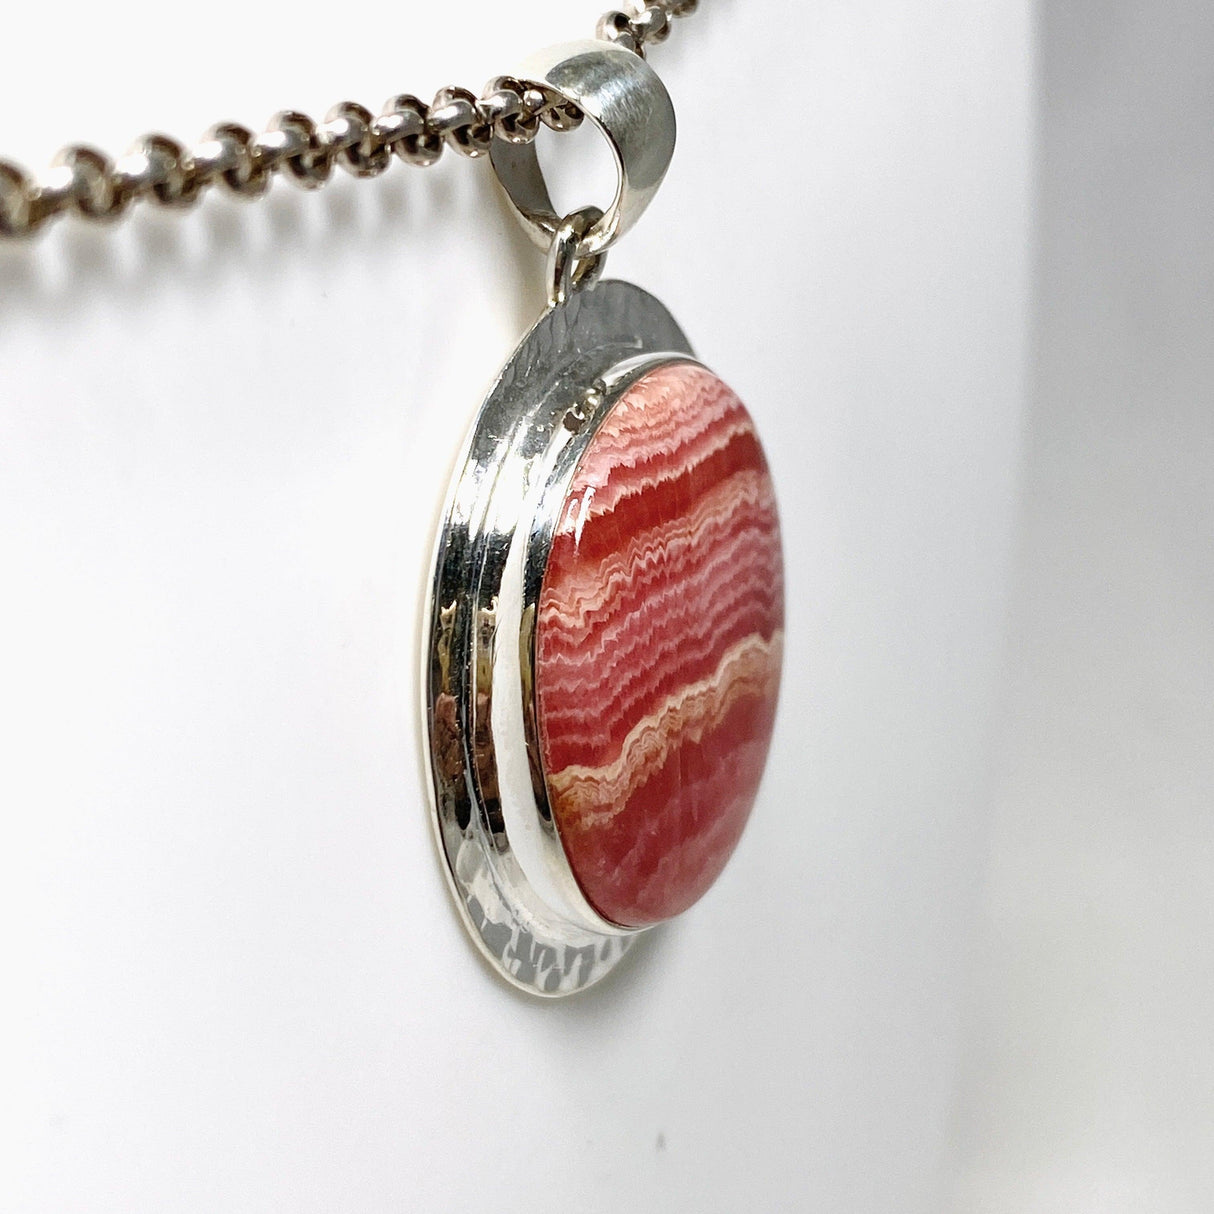 Rhodochrosite Round Pendant in a Hammered Setting KPGJ4321 - Nature's Magick